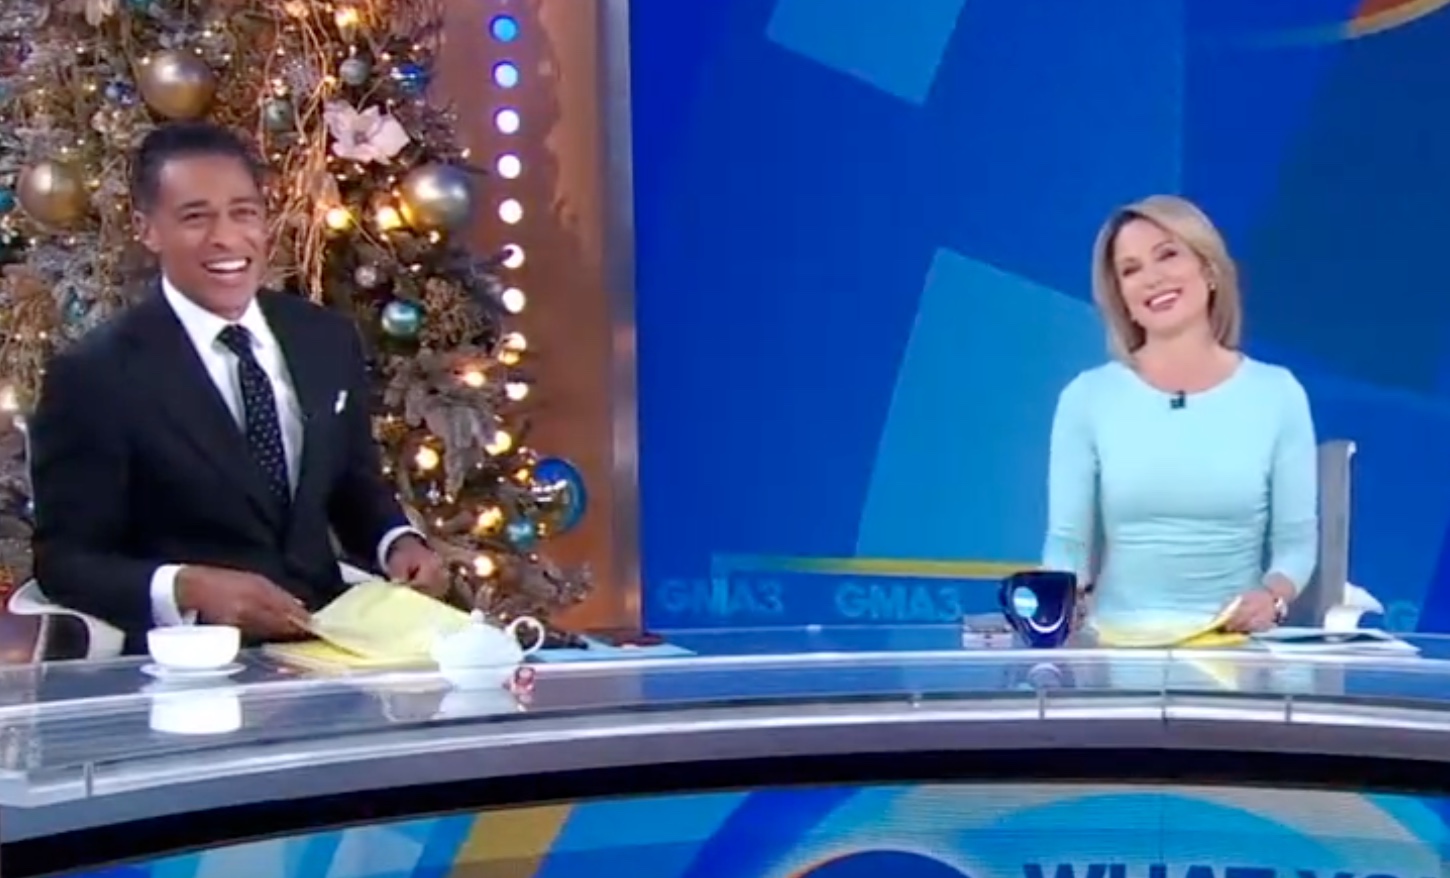 Former GMA Hosts Amy Robach and T.J. Holmes Reveal the Status of Their Relationship After Break Up Rumors Go Viral | Amy Robach and T.J. Holmes are addressing rumors that they have ended their relationship. The rumors seemed to have started after the infamous couple shared their latest podcast episode.